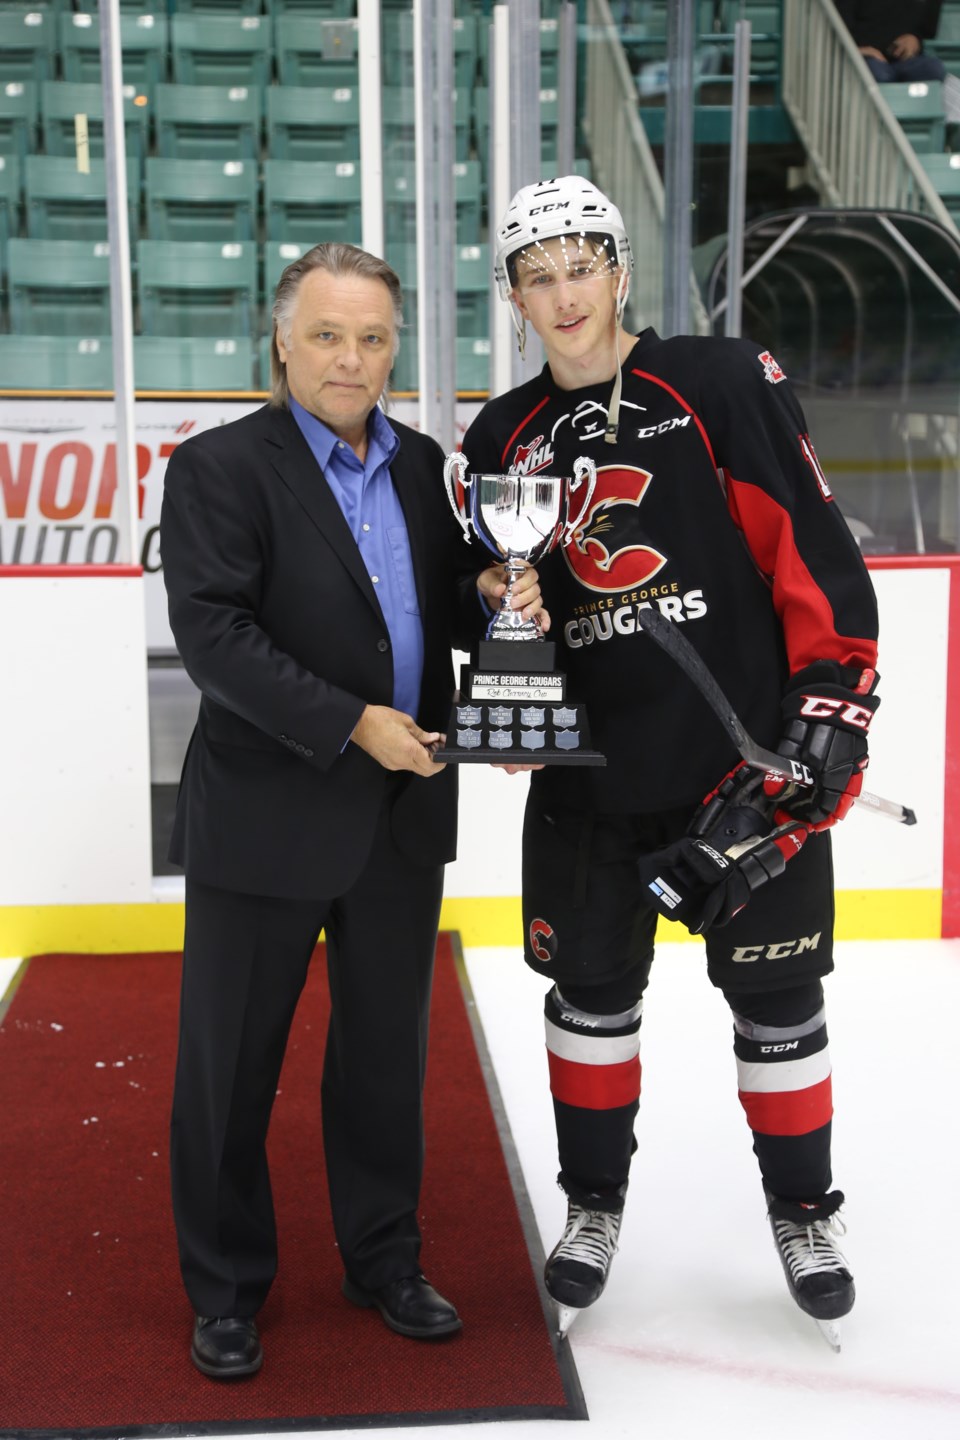 Cougars Rob Charney Cup.jpg